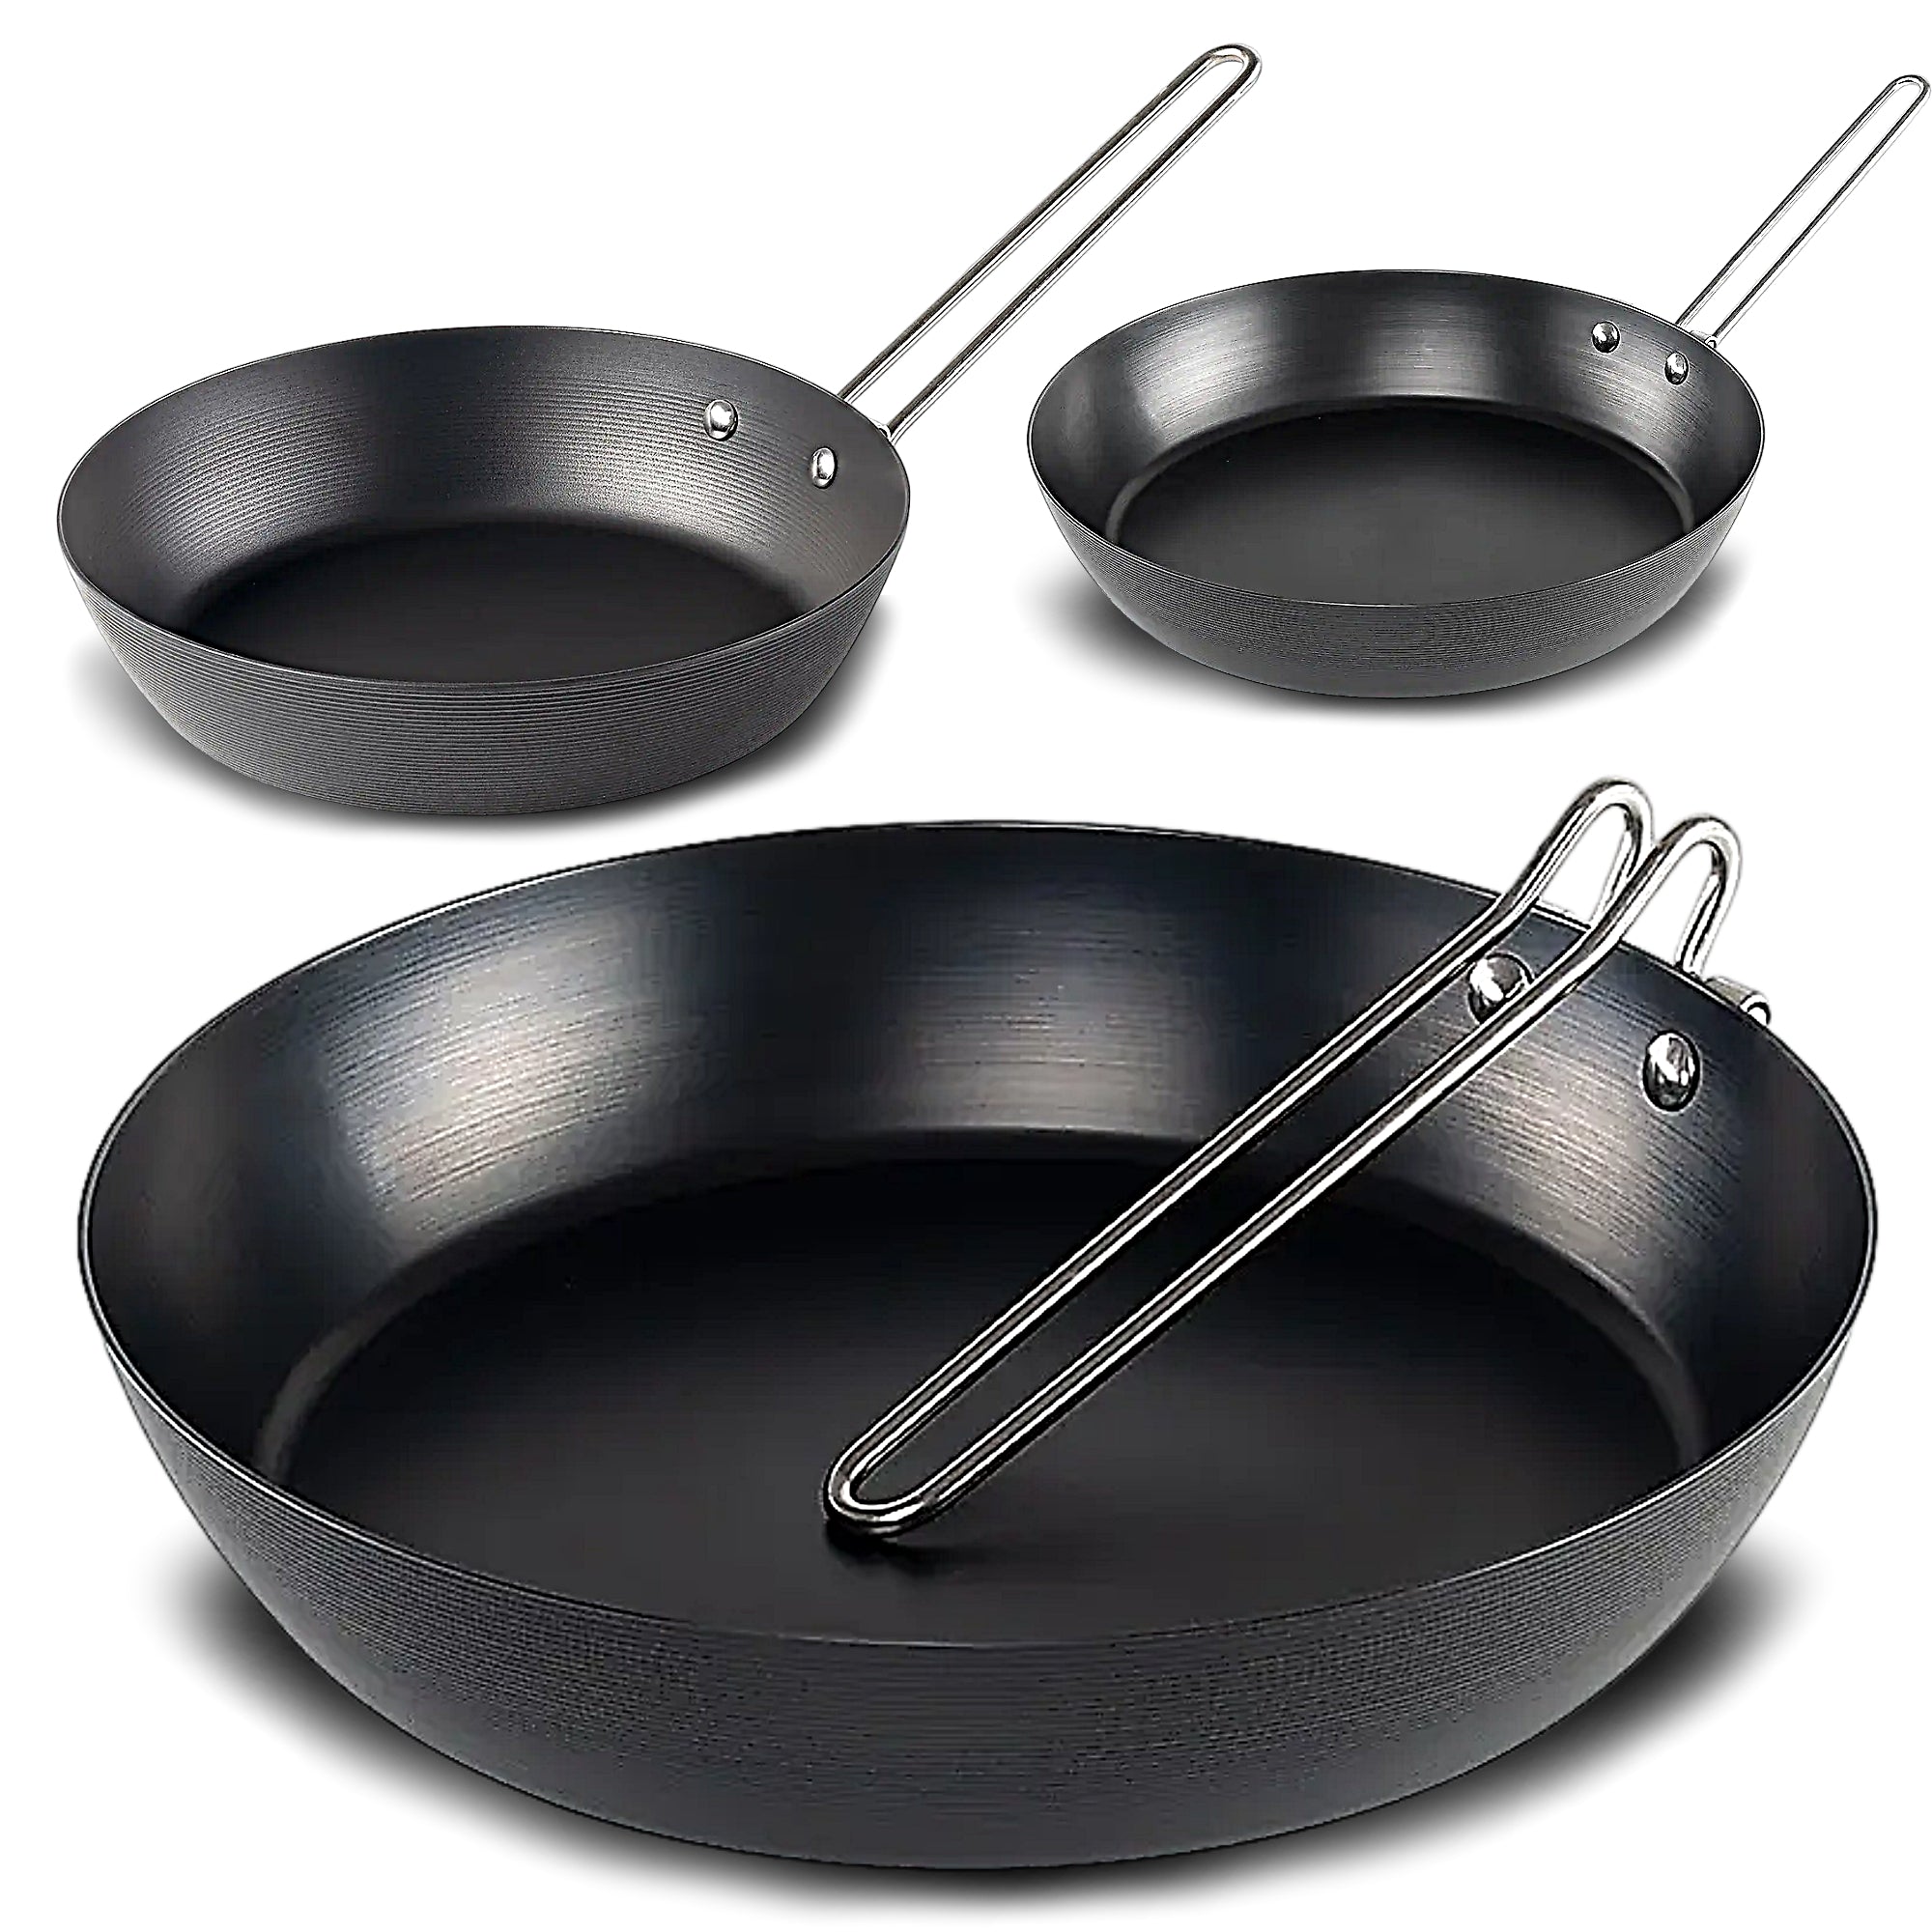 GSI Glacier Stainless Fry Pan, 10